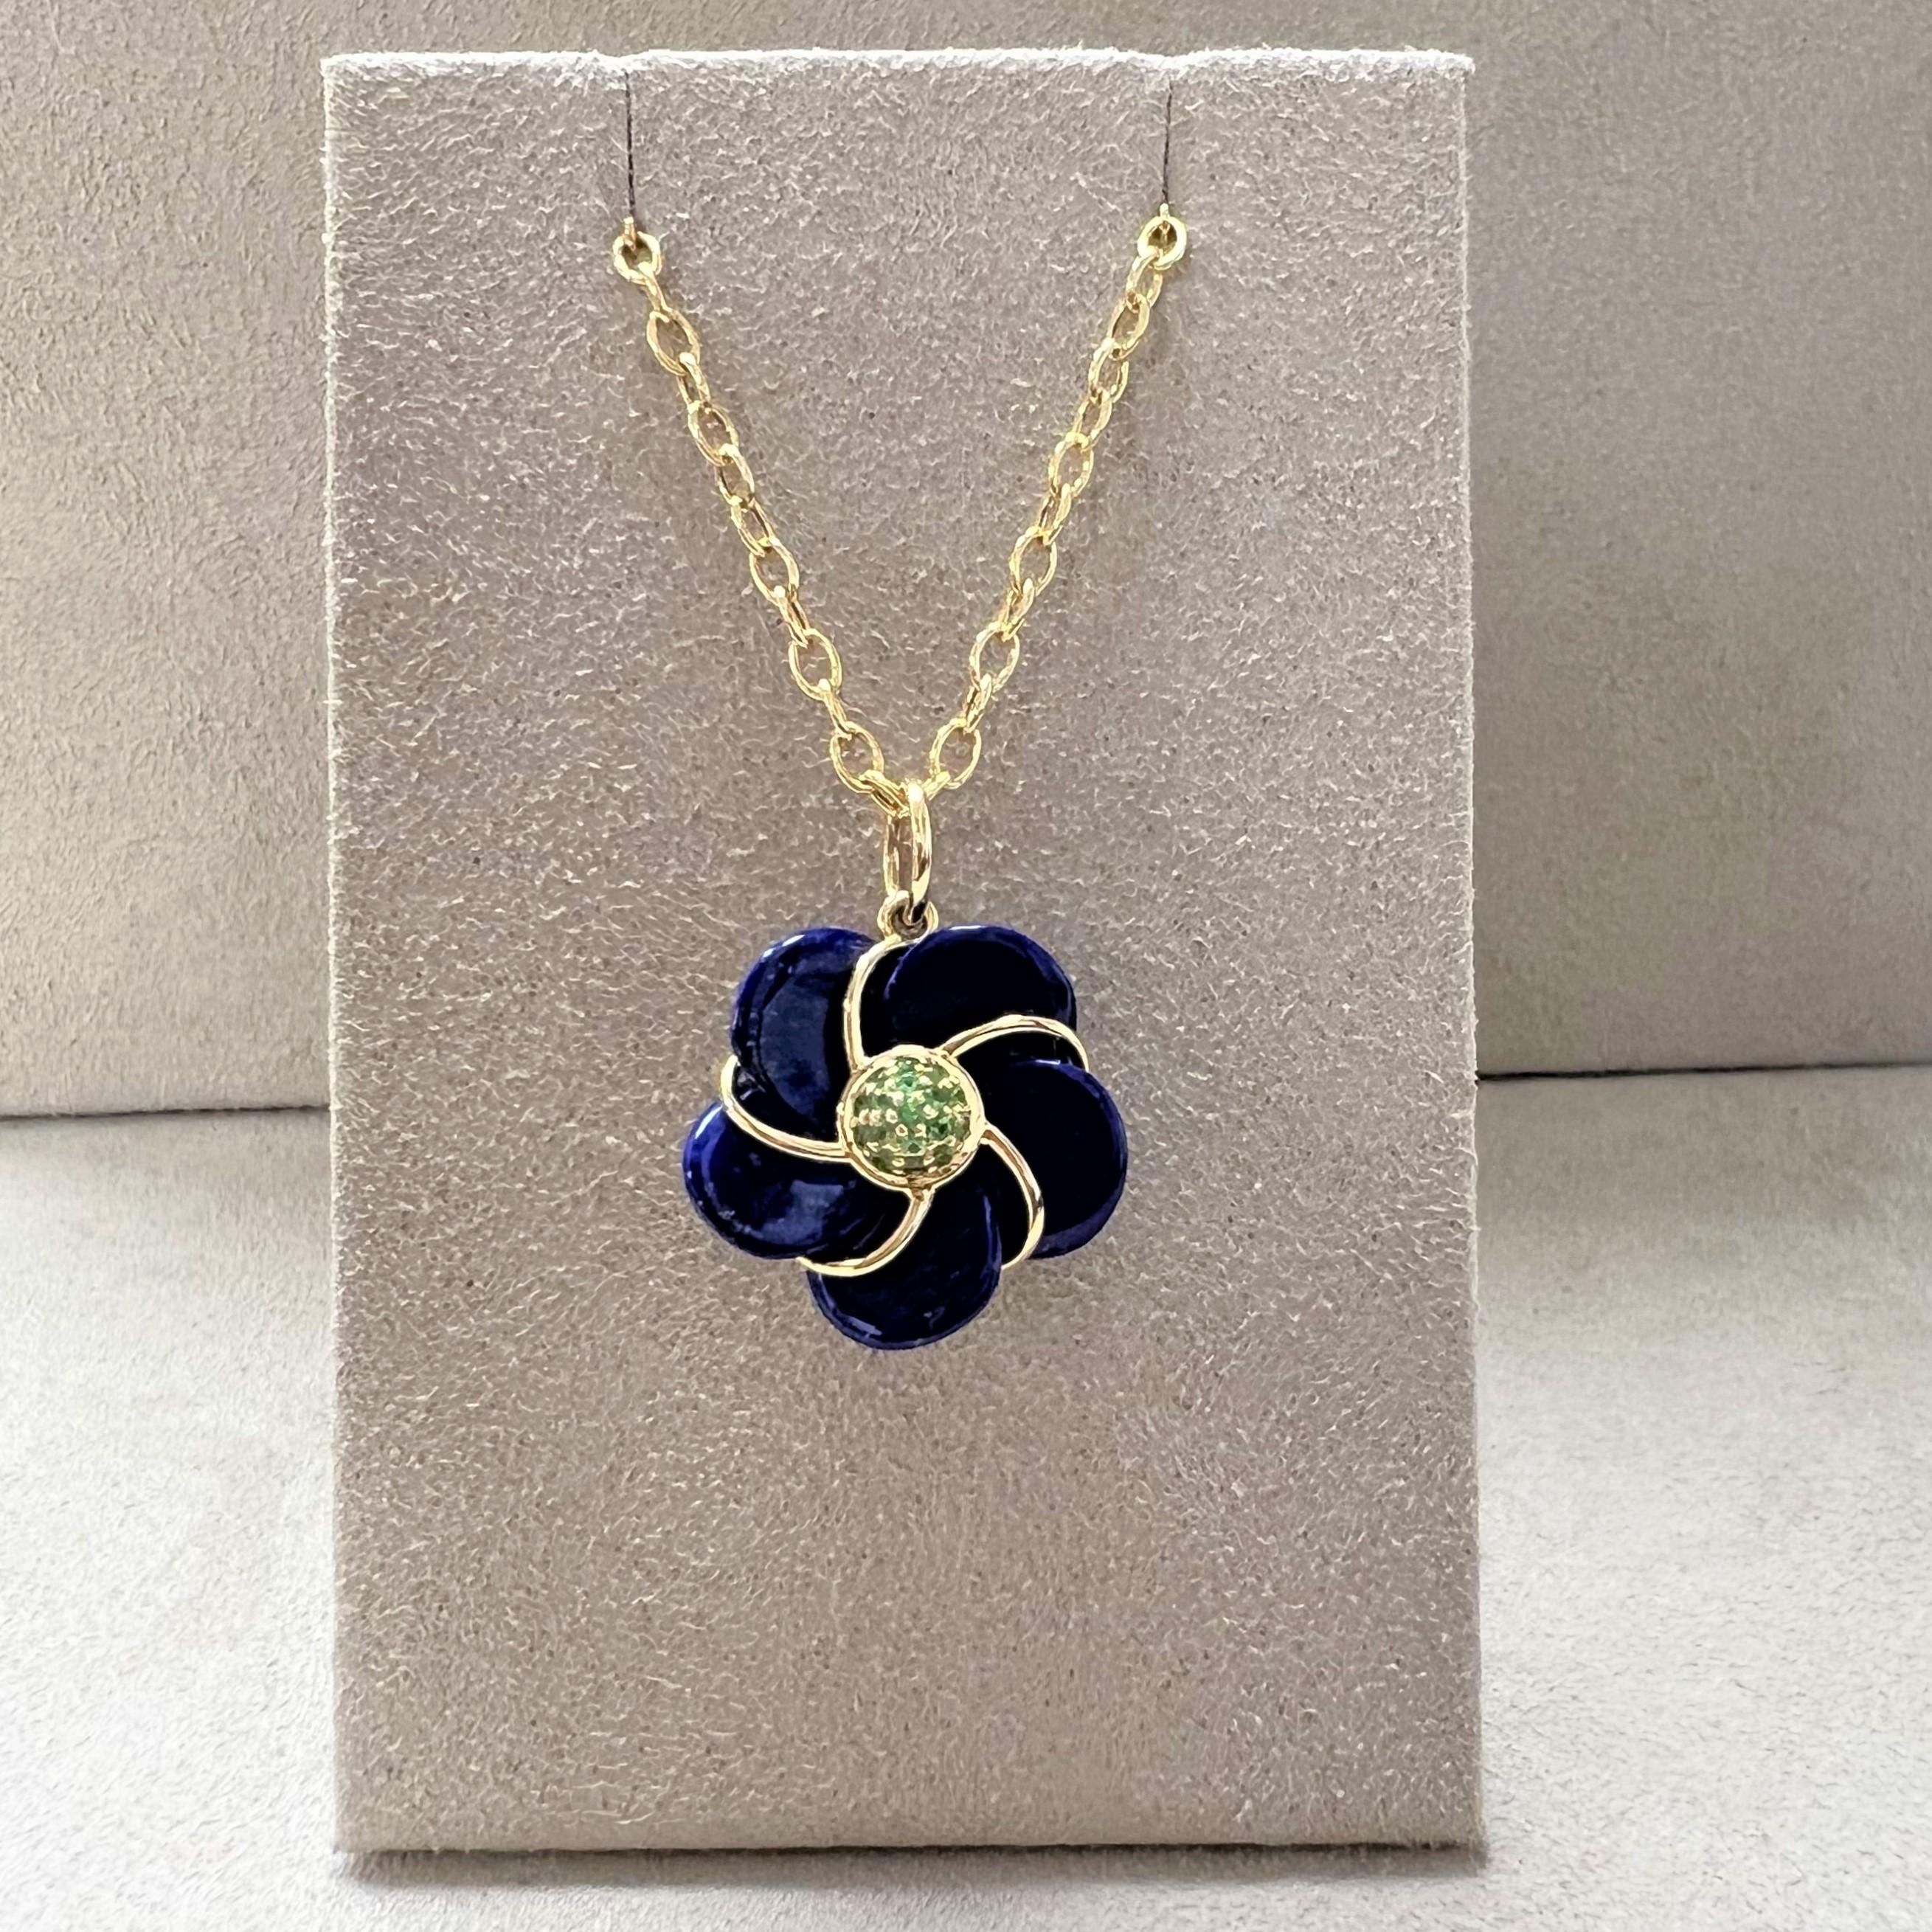 Created in 18 karat yellow gold
Lapis Lazuli 13.80 carats approx.
Tsavorites 0.25 carat approx.
Hand-carved pendant
Limited edition
Chain sold separately


 About the Designers ~ Dharmesh & Namrata

Drawing inspiration from little things, Dharmesh &